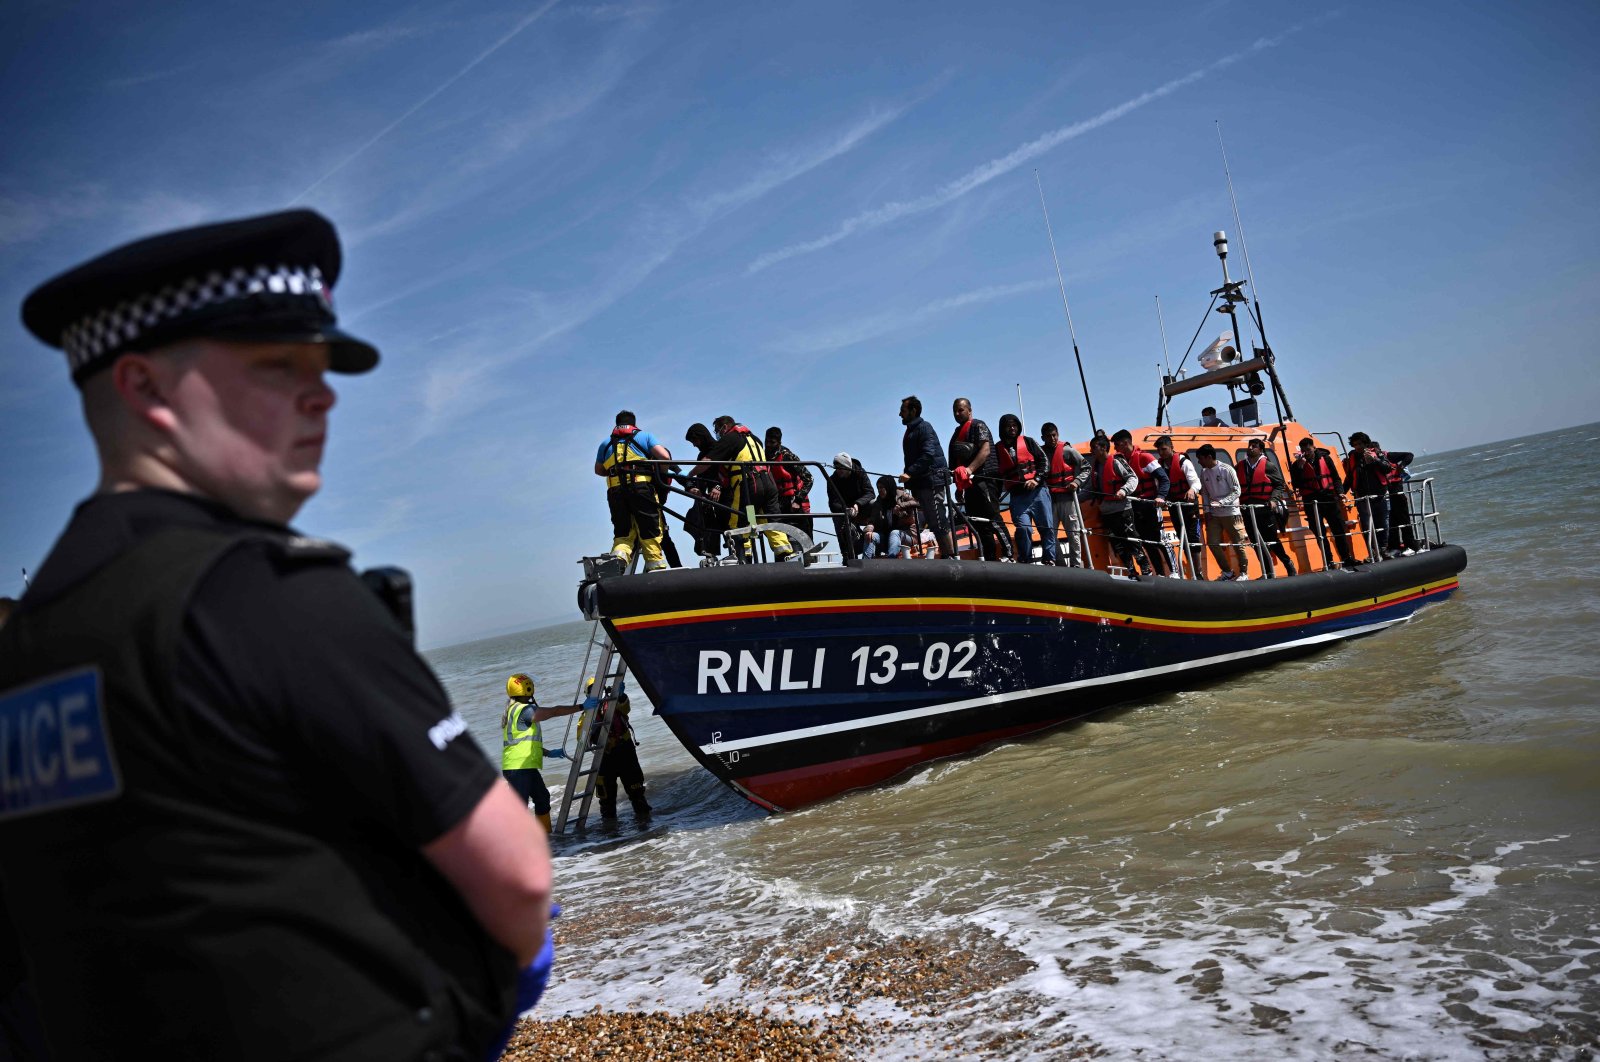 A British police officer stands guard on the beach of Dungeness, on the southeast coast of England on June 15, 2022, as Royal National Lifeboat Institution&#039;s (RNLI) members of staff help migrants disembark from one of their lifeboats after they were picked up at sea while attempting to cross the English Channel. (AFP Photo)